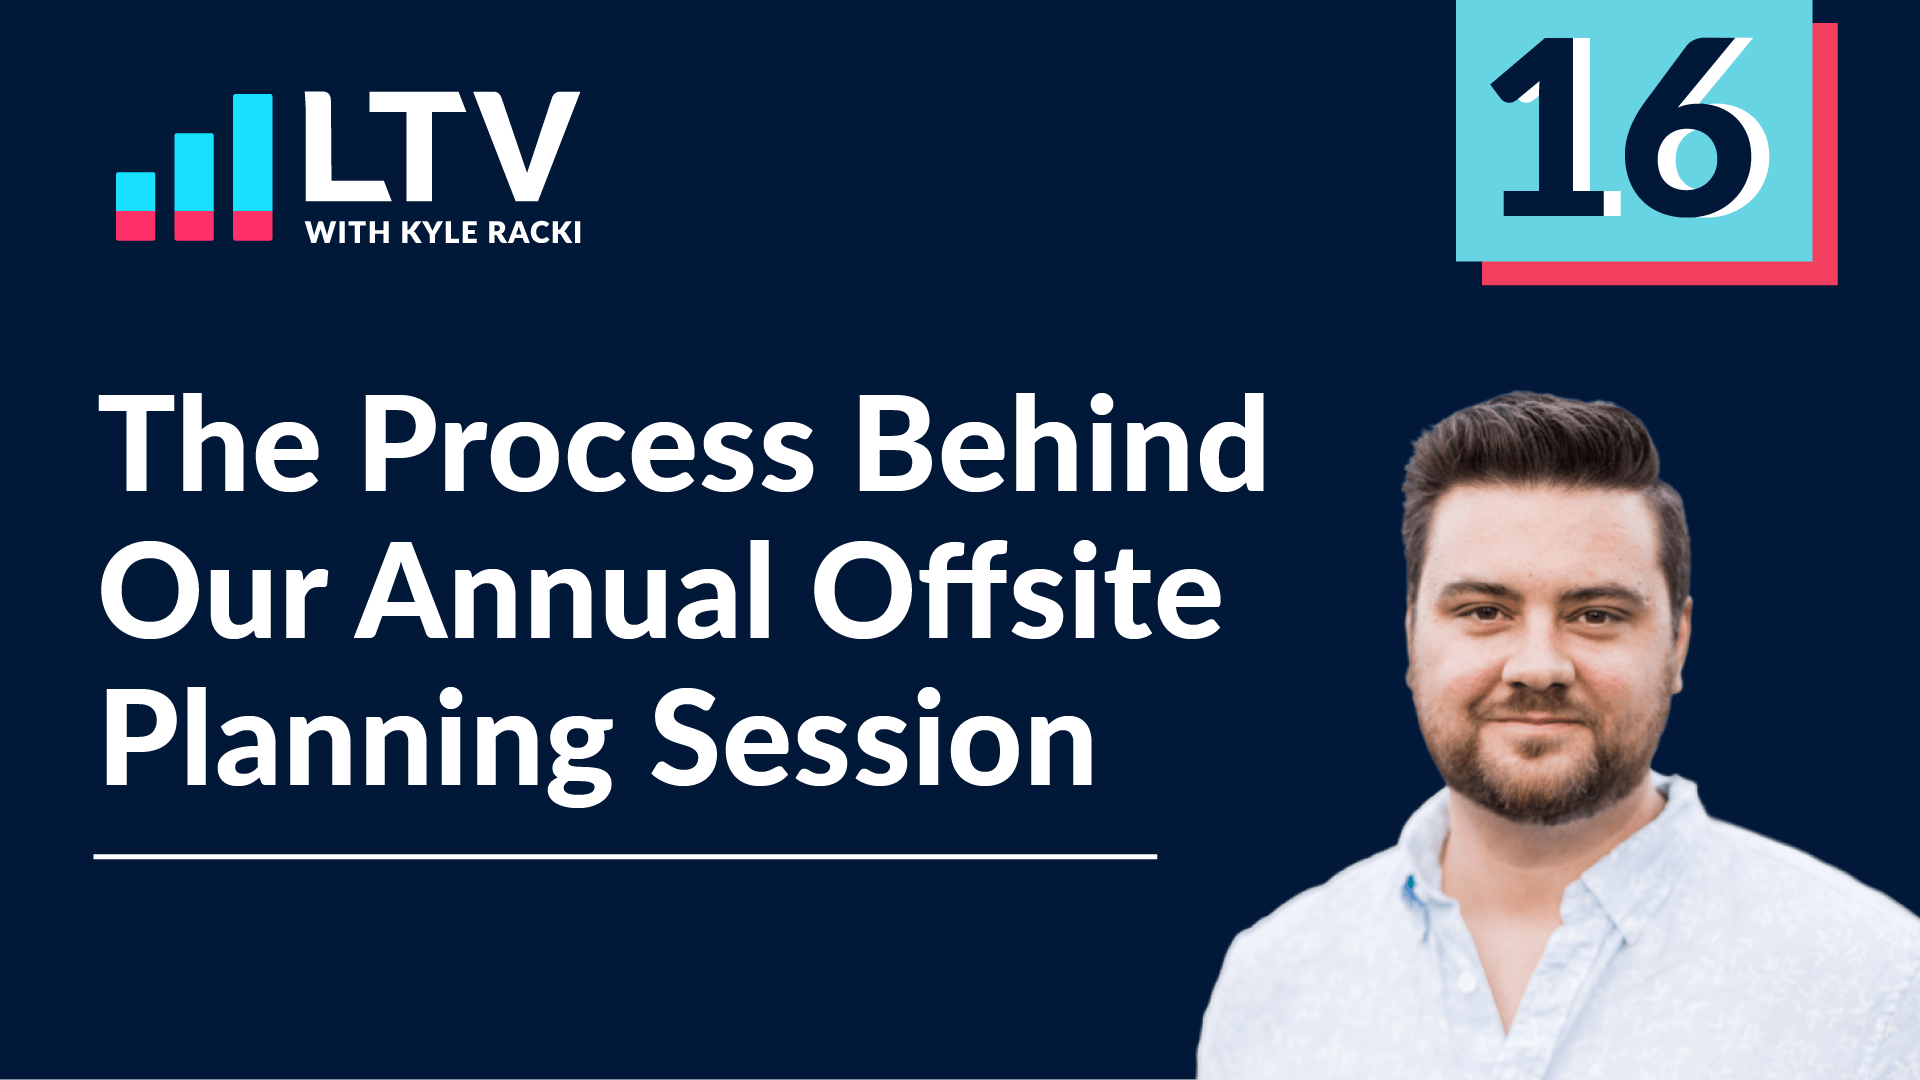 LTV Podcast Episode 16: The Process Behind Our Annual Offsite Planning Session